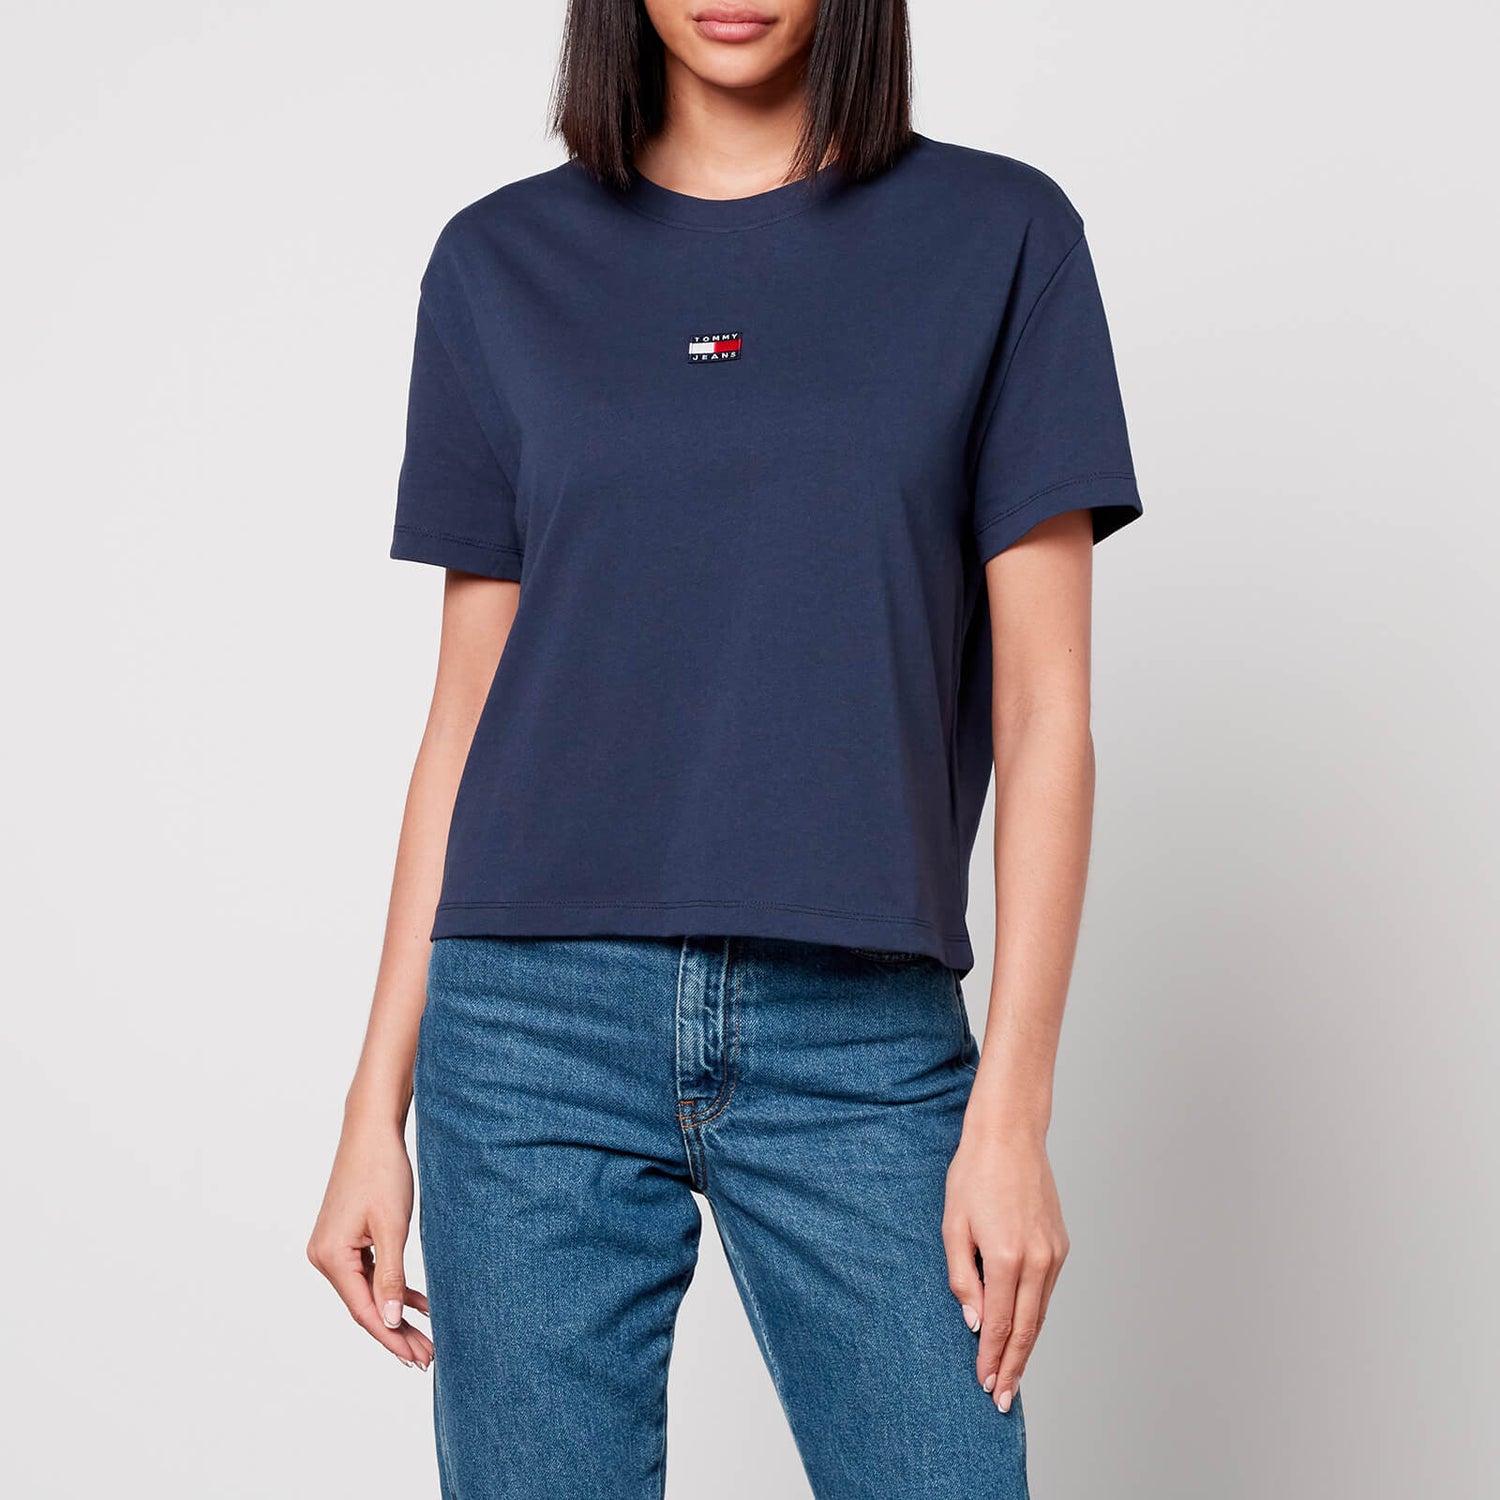 Tommy Jeans Classic Cotton-Blend Small Badge T-Shirt - XS